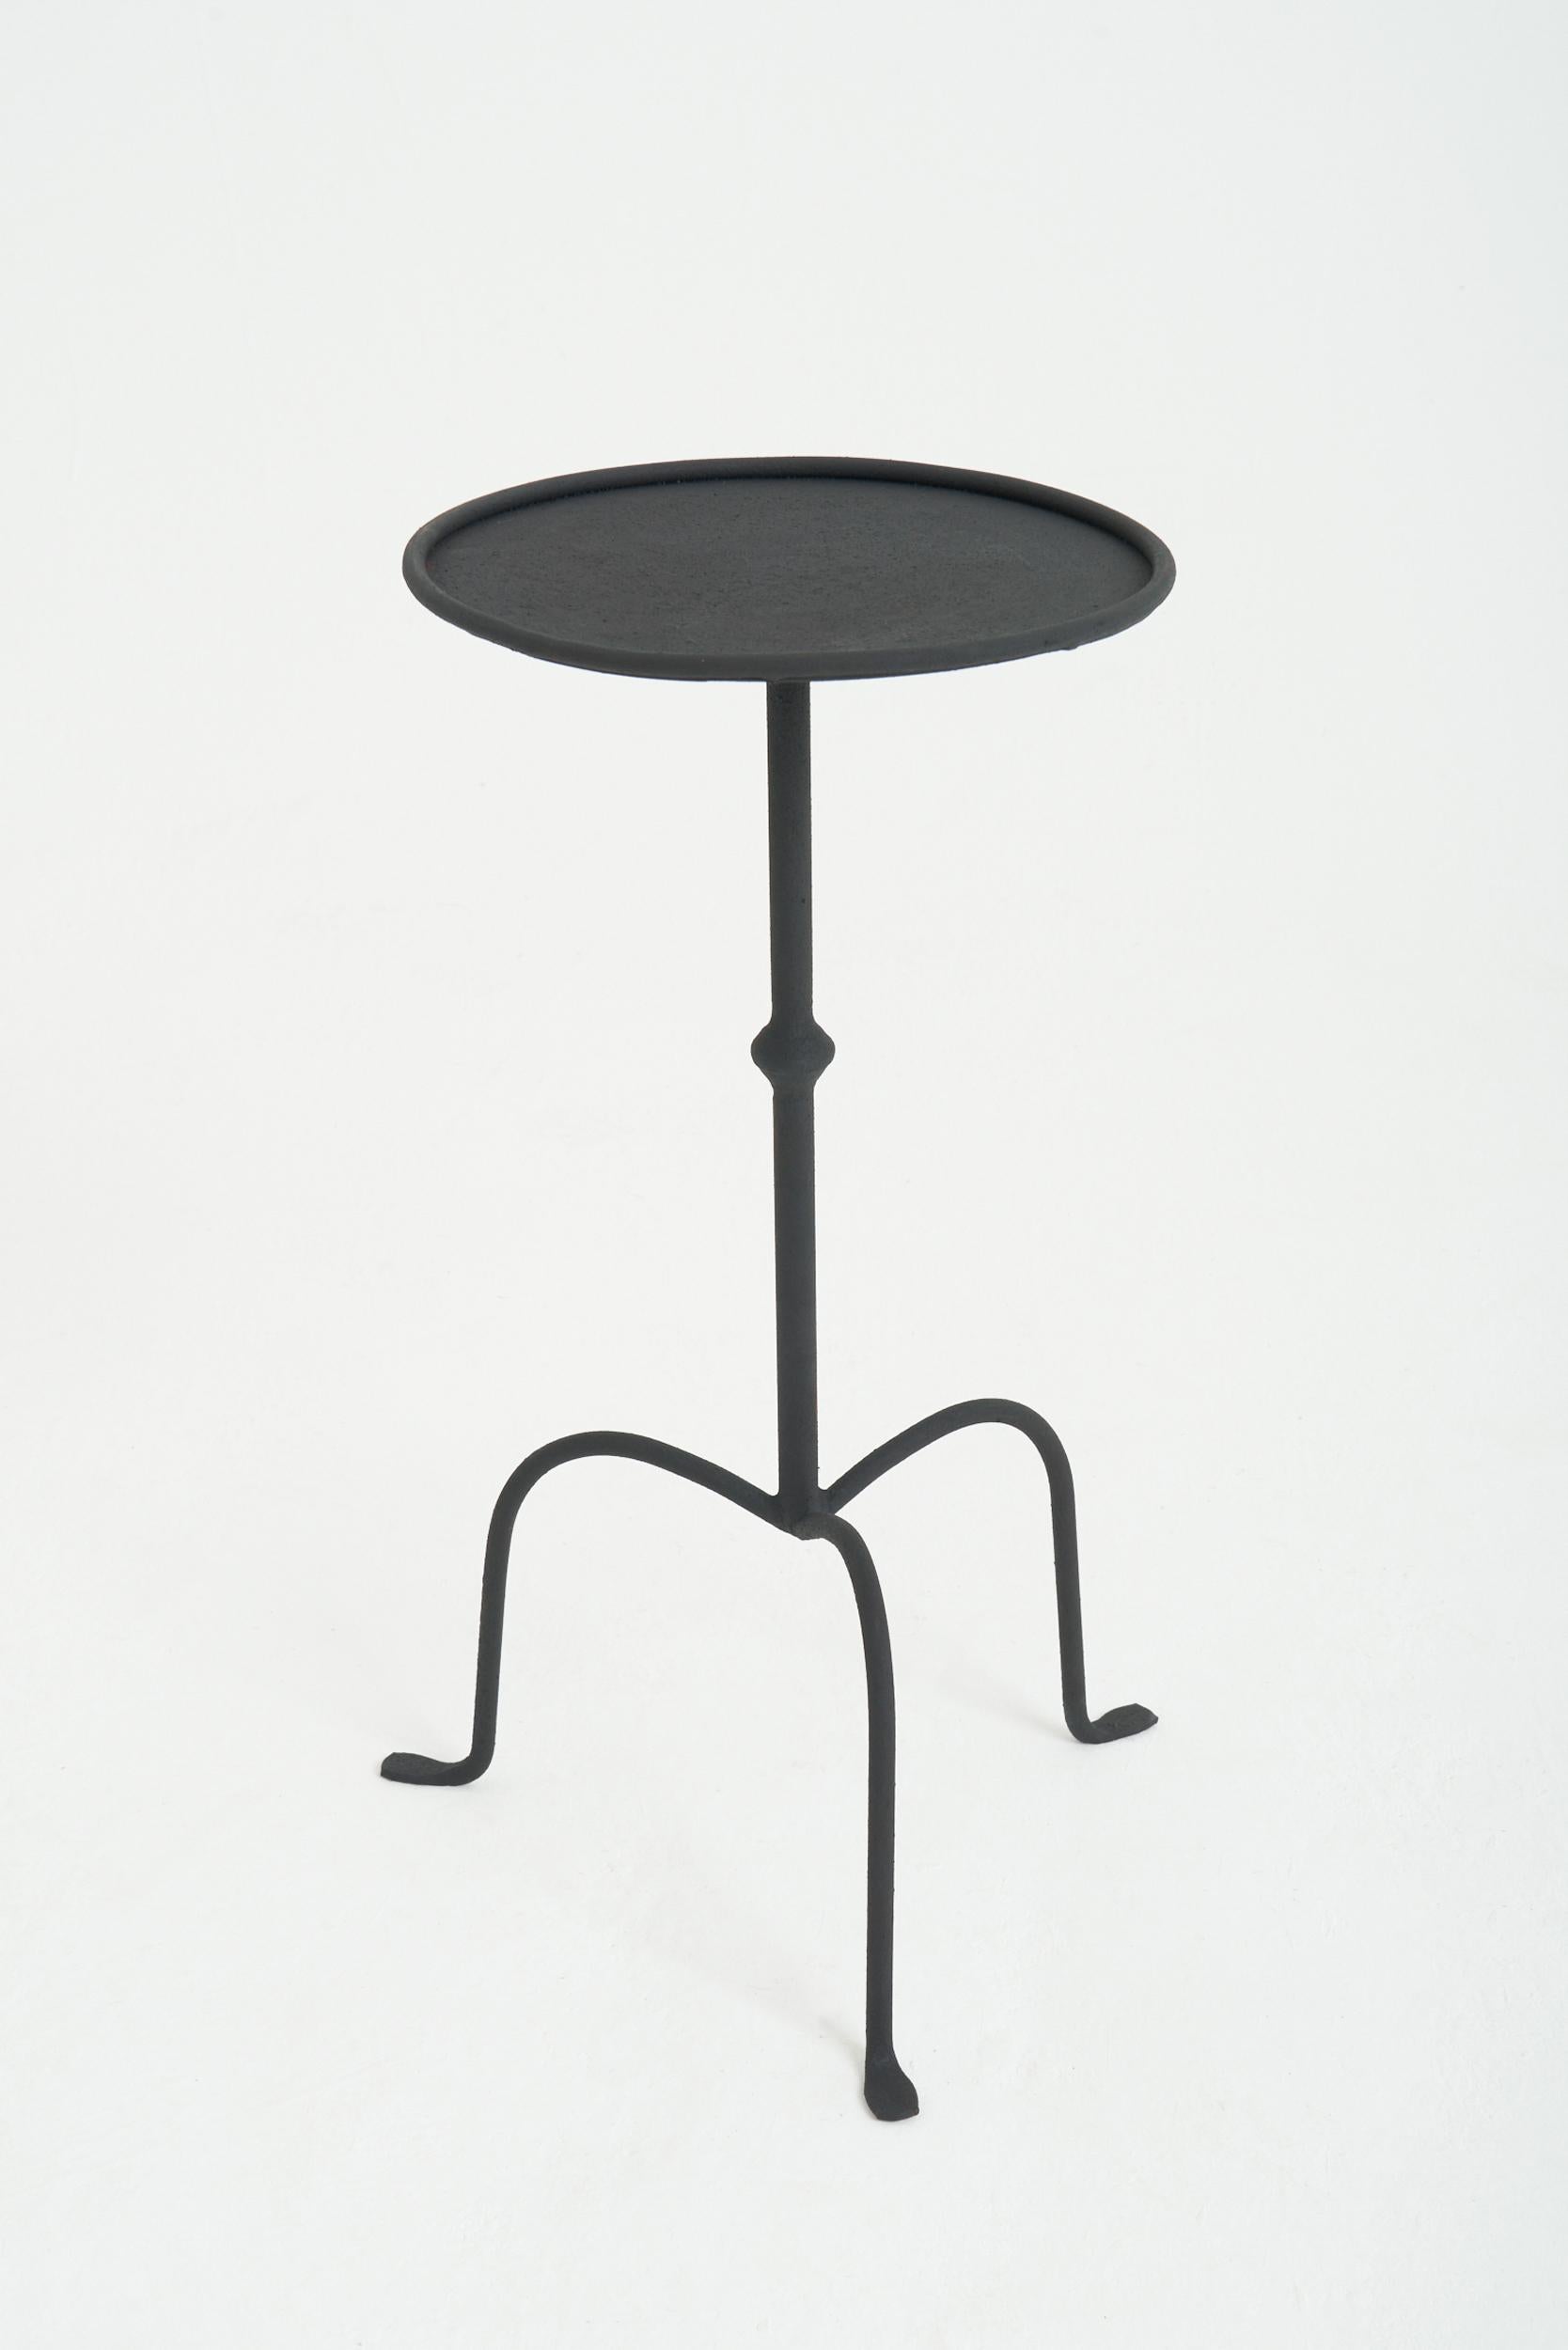 A black patinated wrought iron martini table.
Spain, contemporary
58.5 cm high by 28 cm diameter 